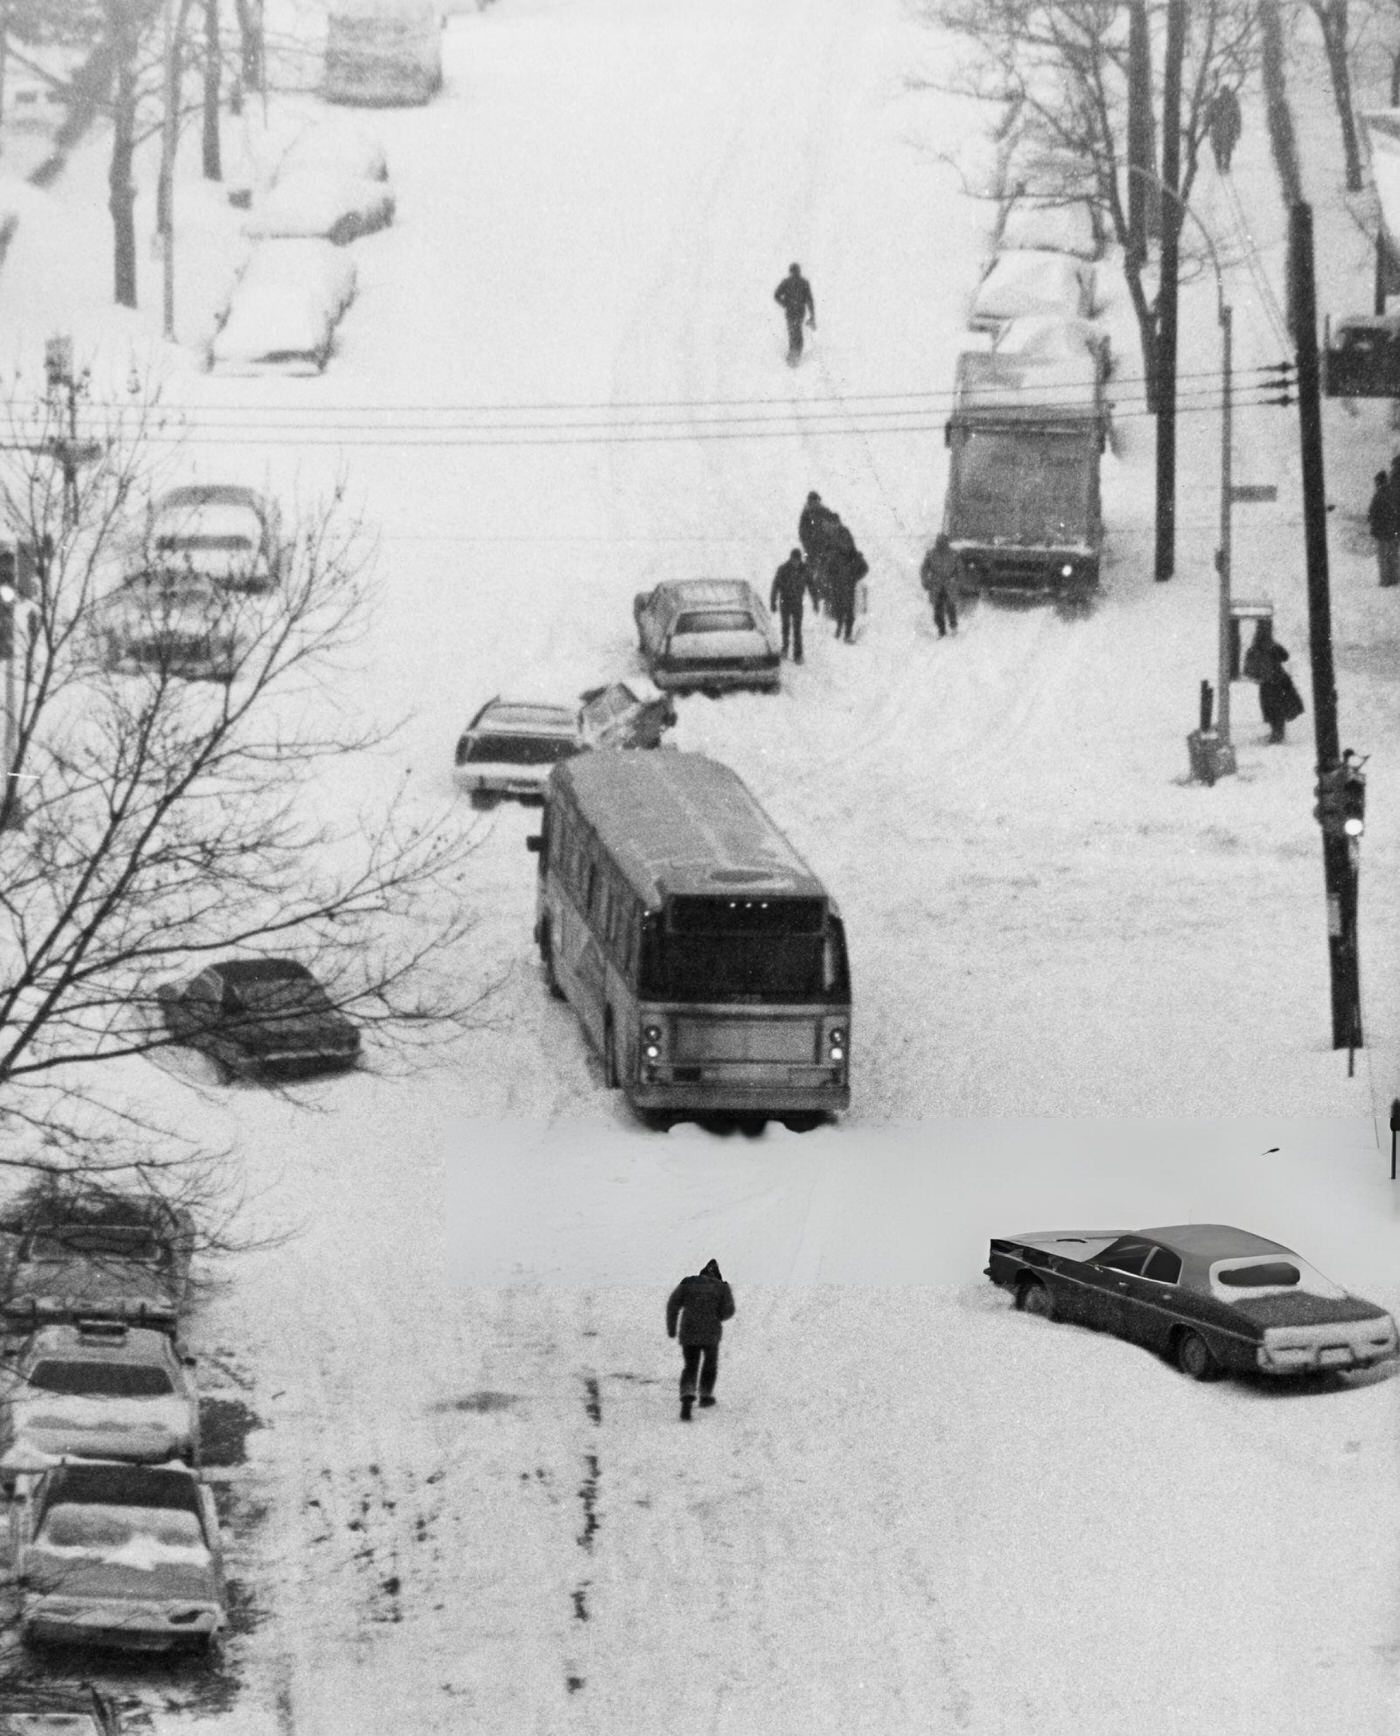 Snow Causes Problems For Traffic In The Rego Park Area Of Queens, 1970S.